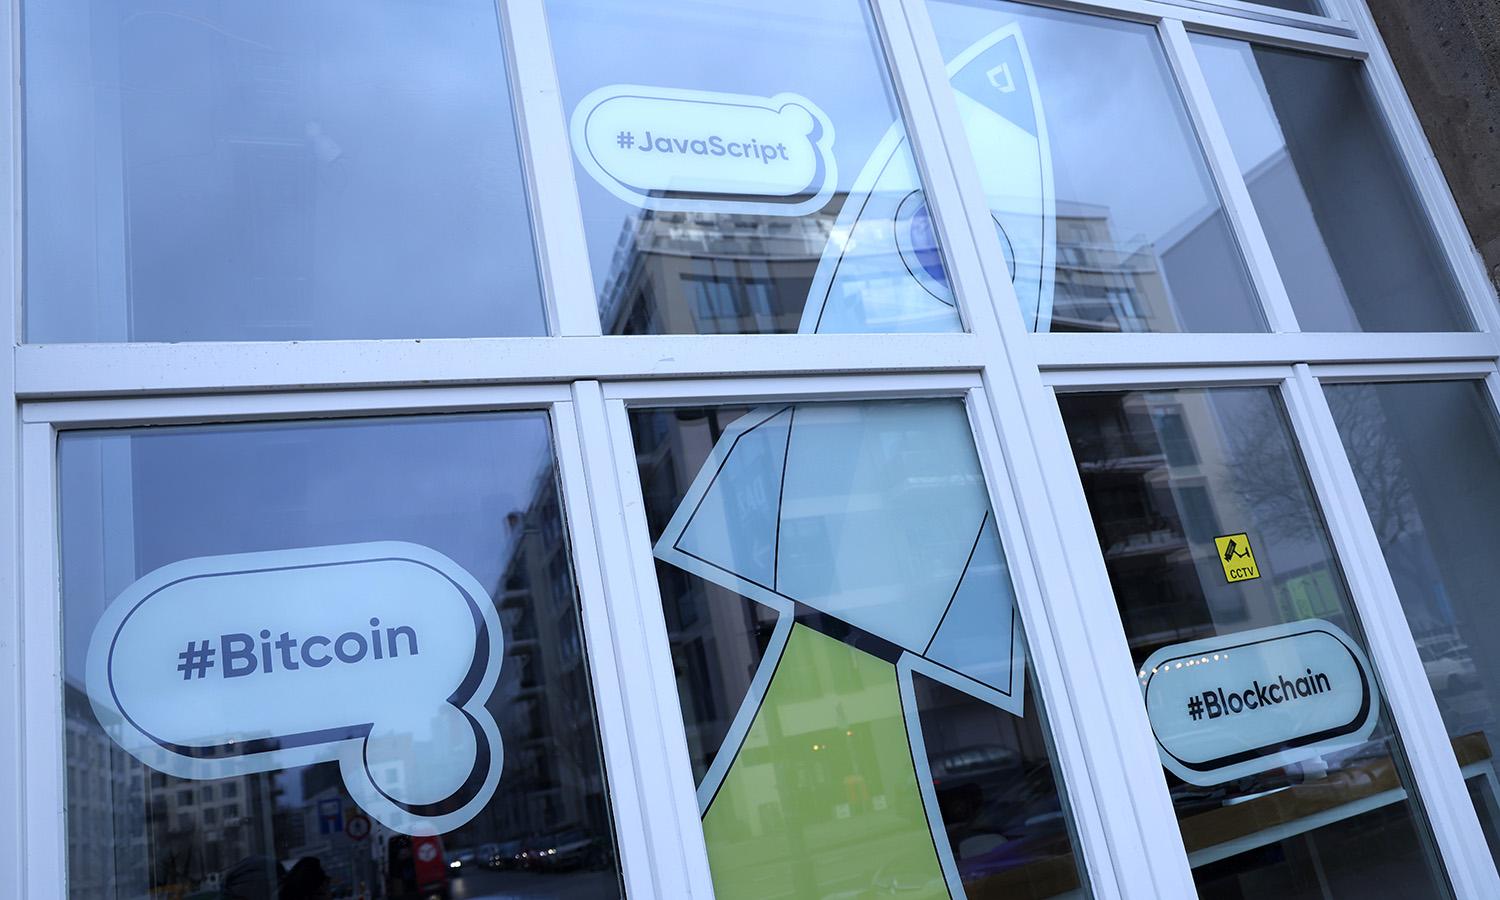 The terms &#8220;Bitcoin,&#8221; &#8220;Blockchain&#8221; and &#8220;JavaScript&#8221; are seen next to a rendition of a rocket in the window of a company that offers blockchain application services on Dec. 21, 2021, in Berlin. (Photo by Sean Gallup/Getty Images)